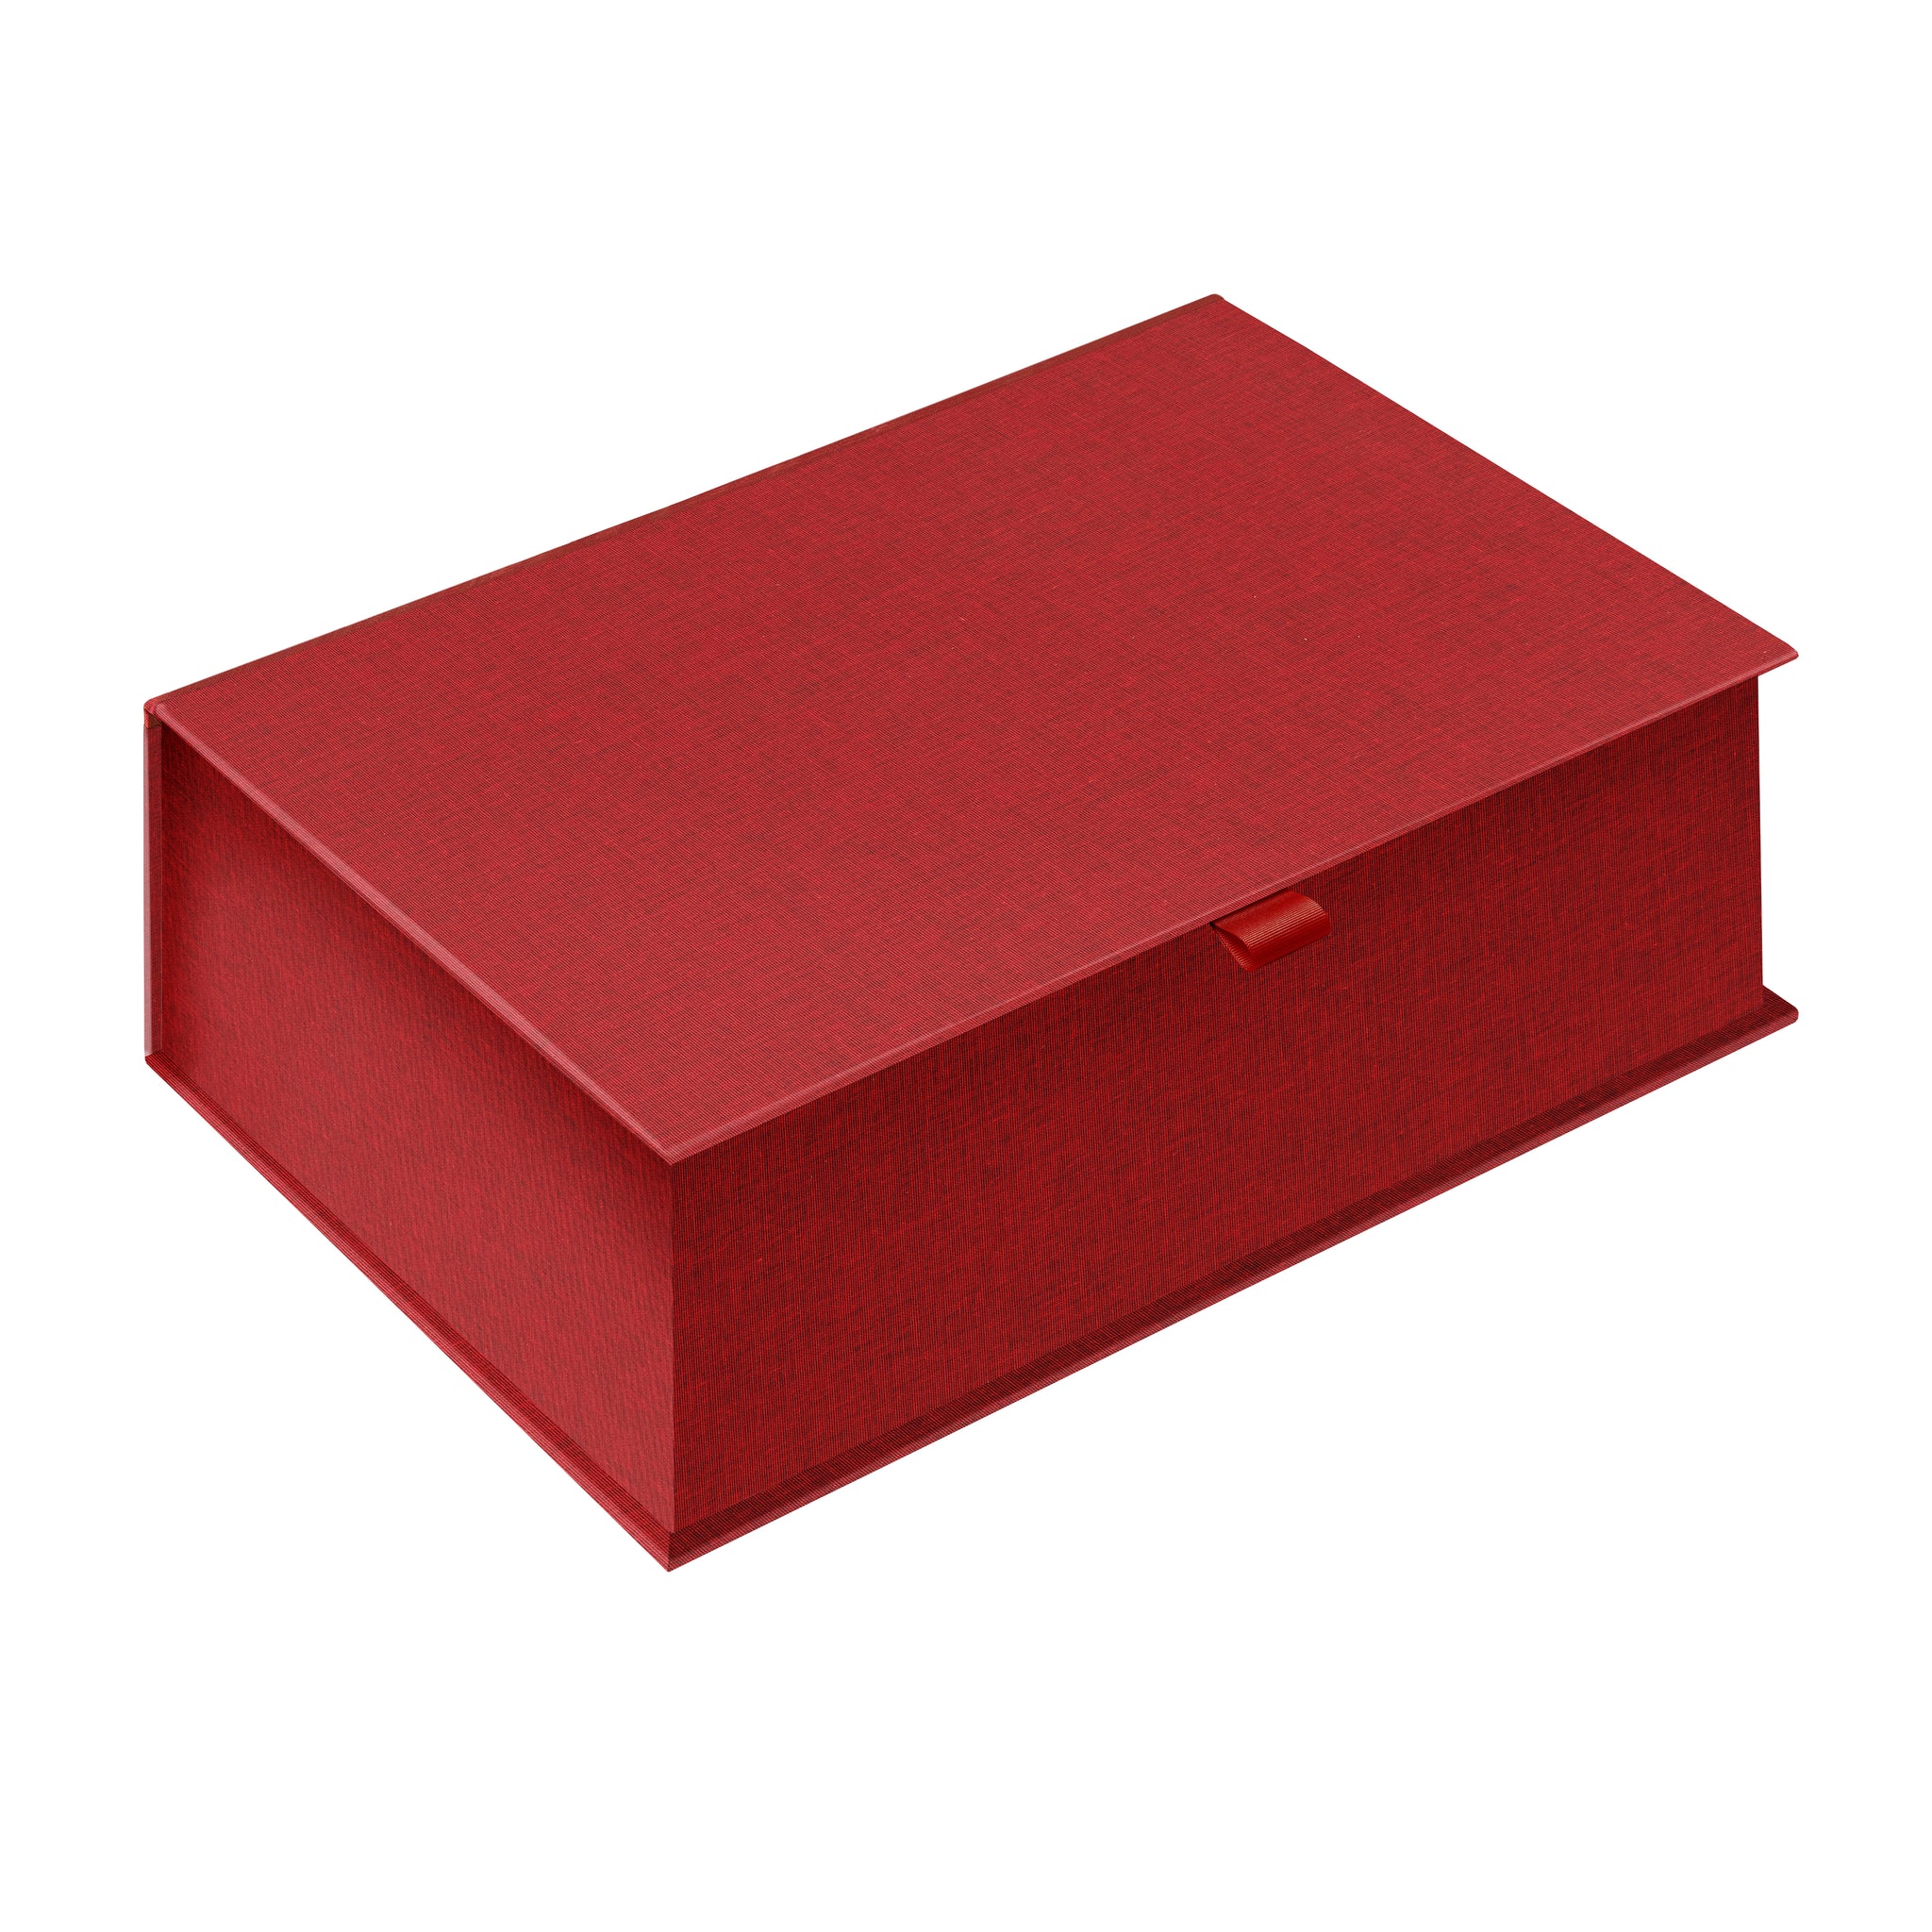 [Exterior Cover: Persian Red]